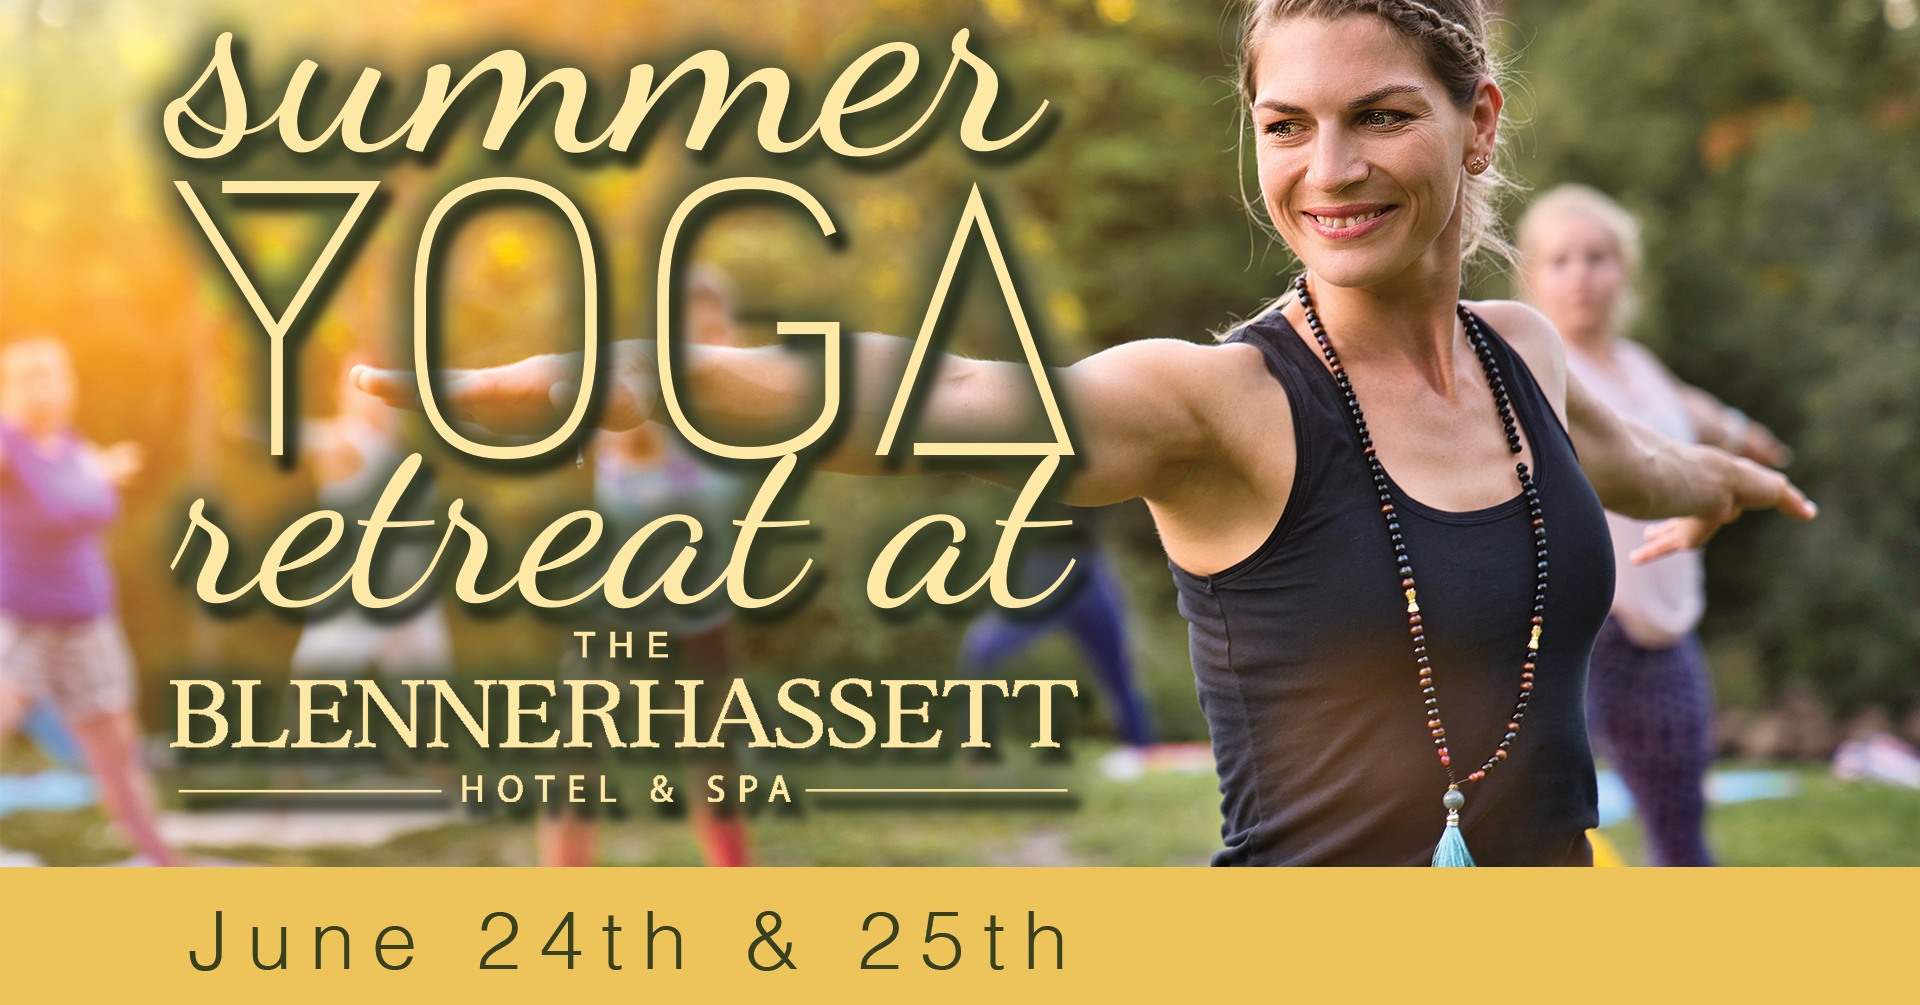 Summer Yoga Retreat at The Blennerhassett Hotel and Spa June 24th & 25th